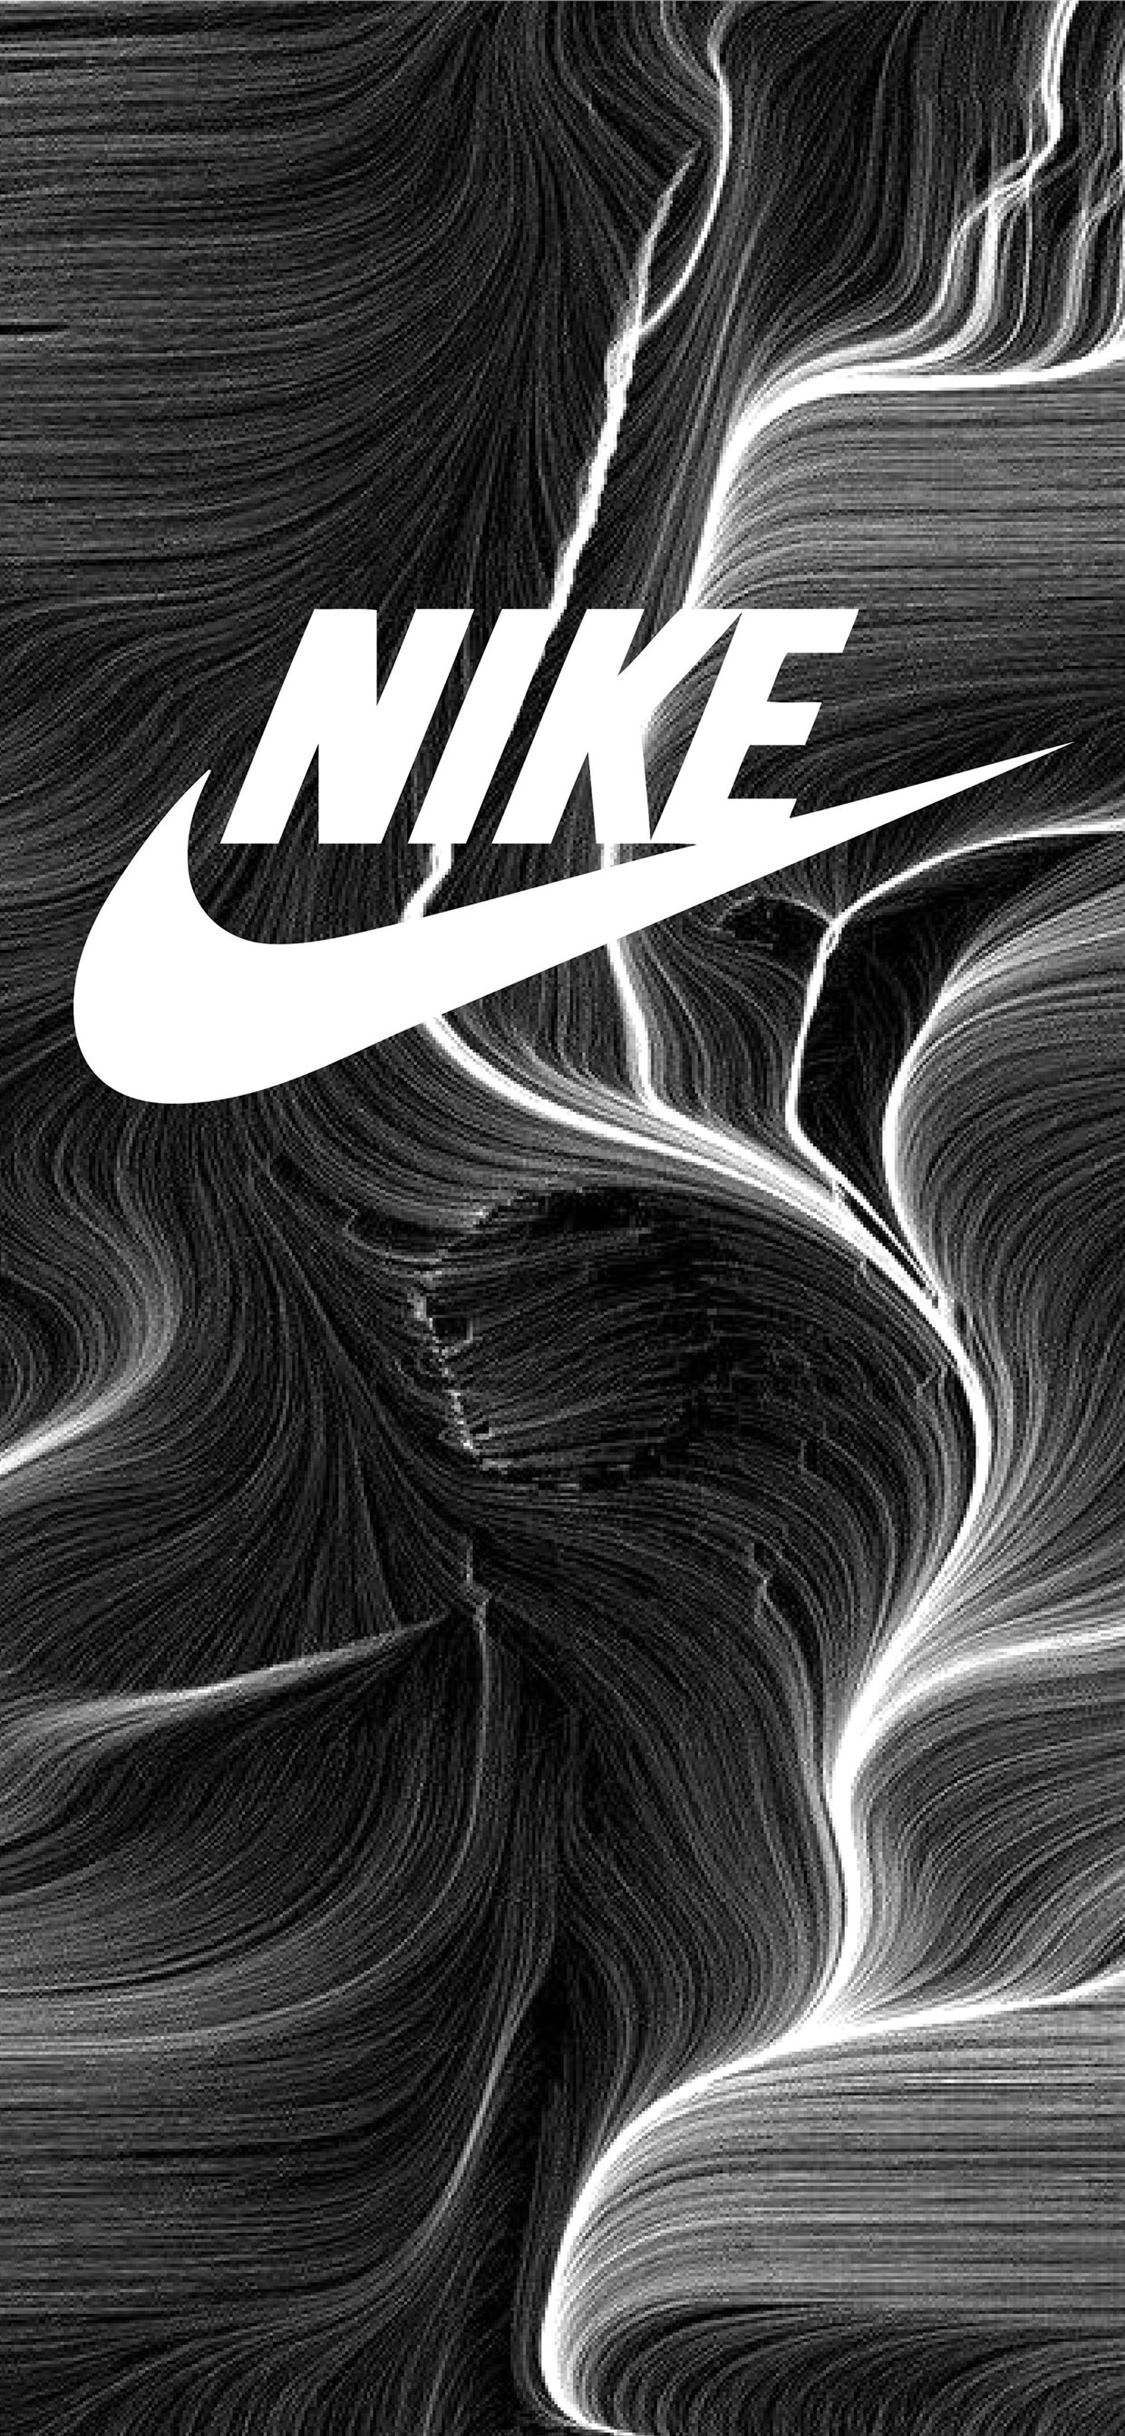 Red And Black Nike Wallpapers